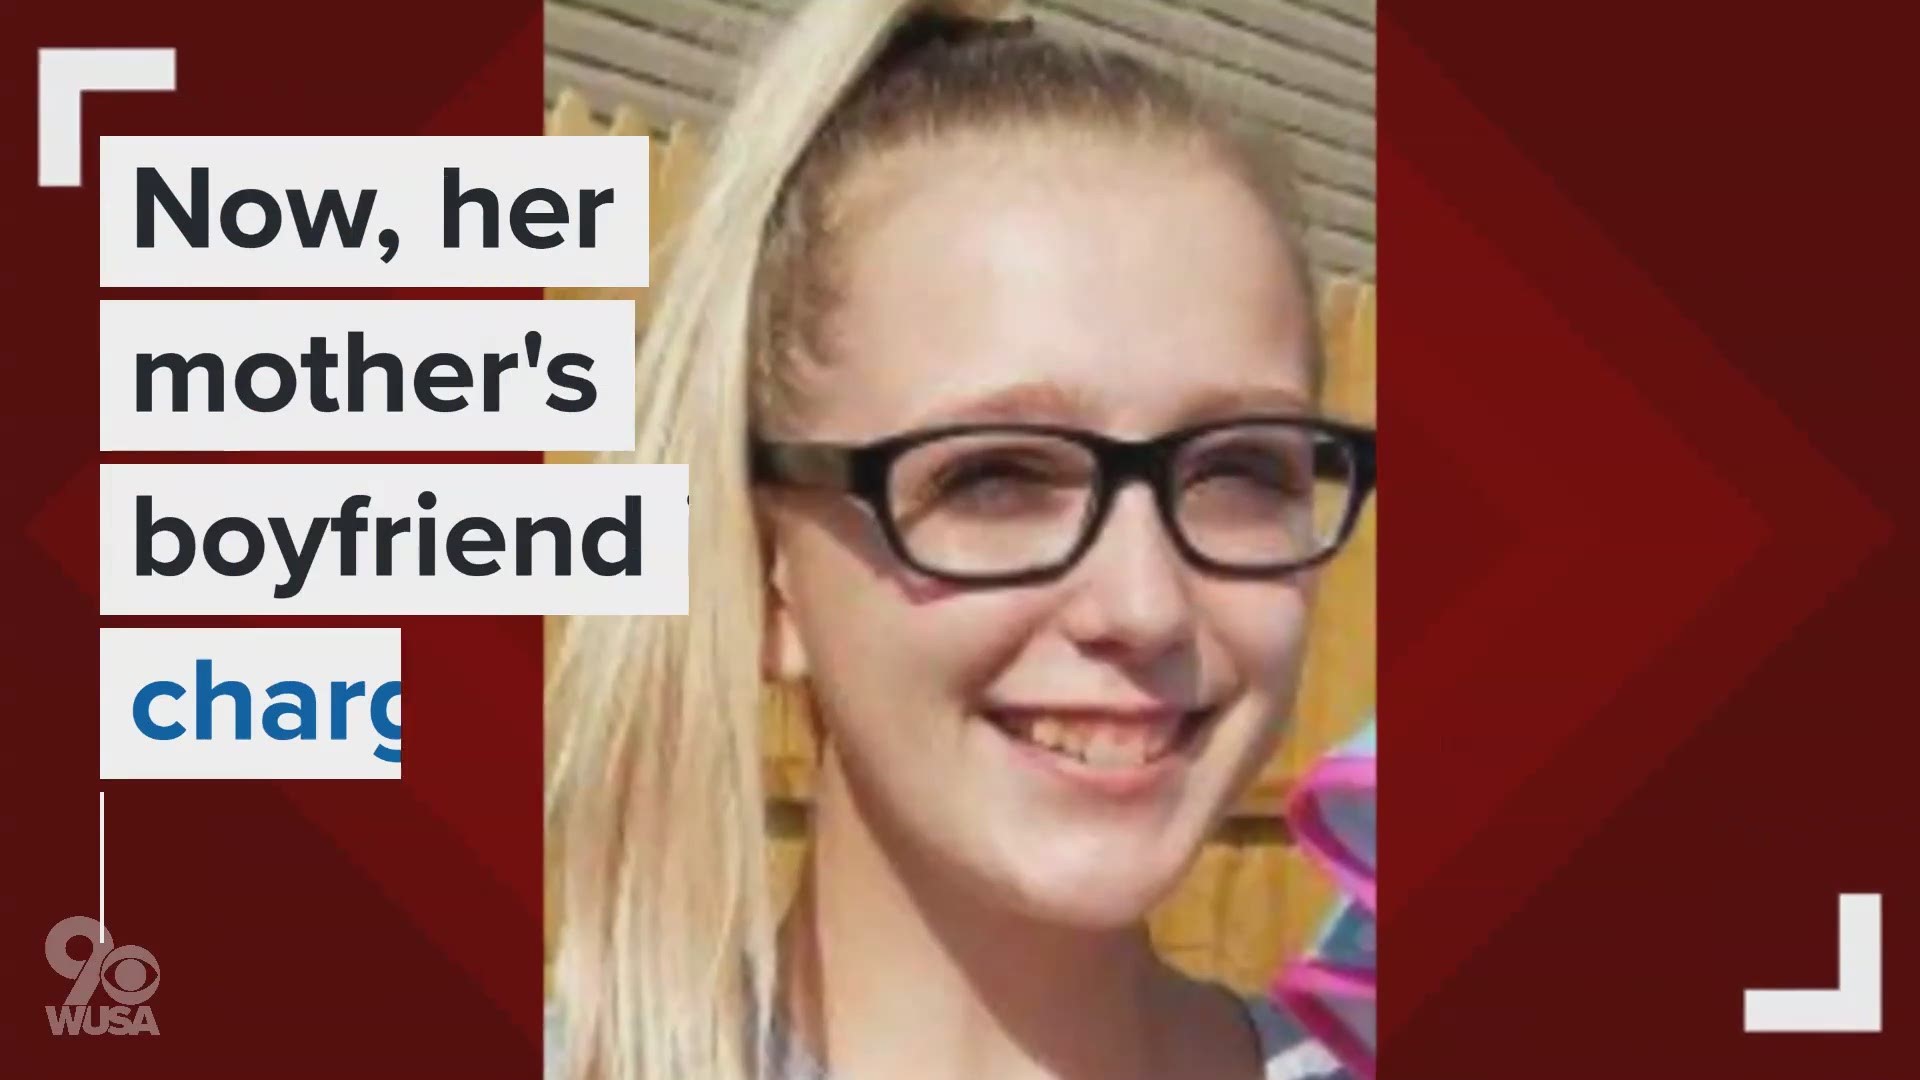 Initially feared to have been abducted, police and volunteers have been scouring the West Virginia countryside searching for the missing teen since early last week.